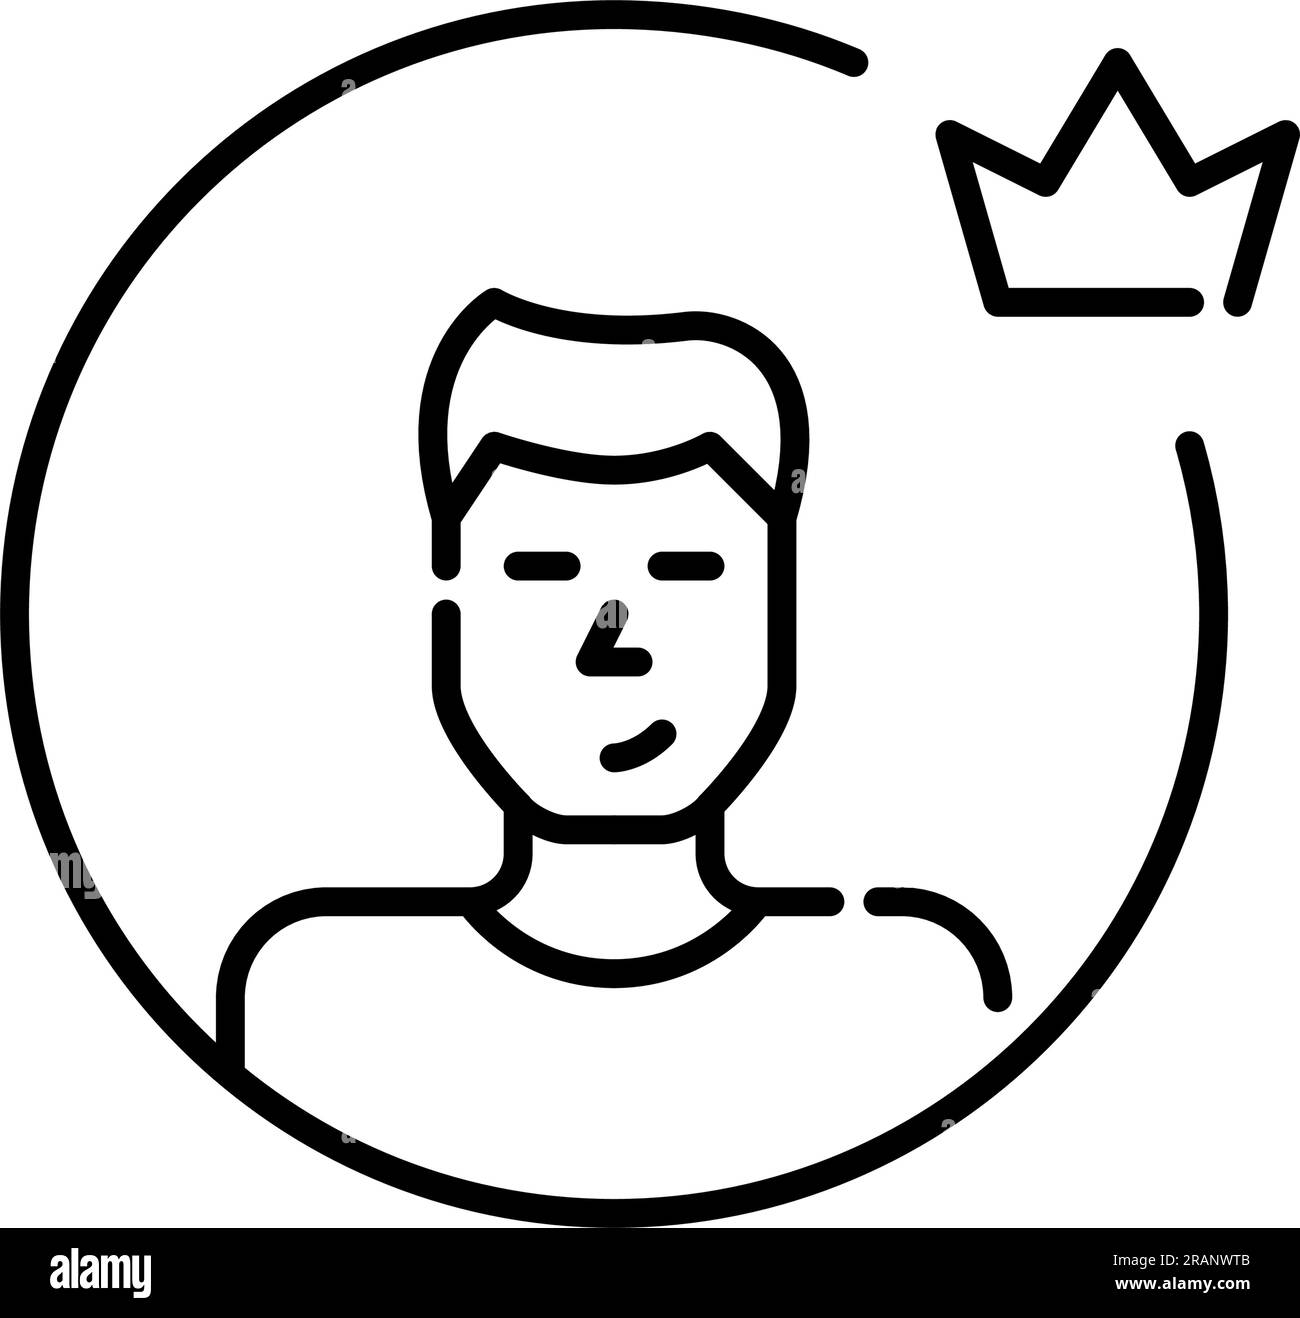 Premium user avatar. Young man with short hair wearing t-shirt. Crown symbol. Pixel perfect, editable stroke Stock Vector